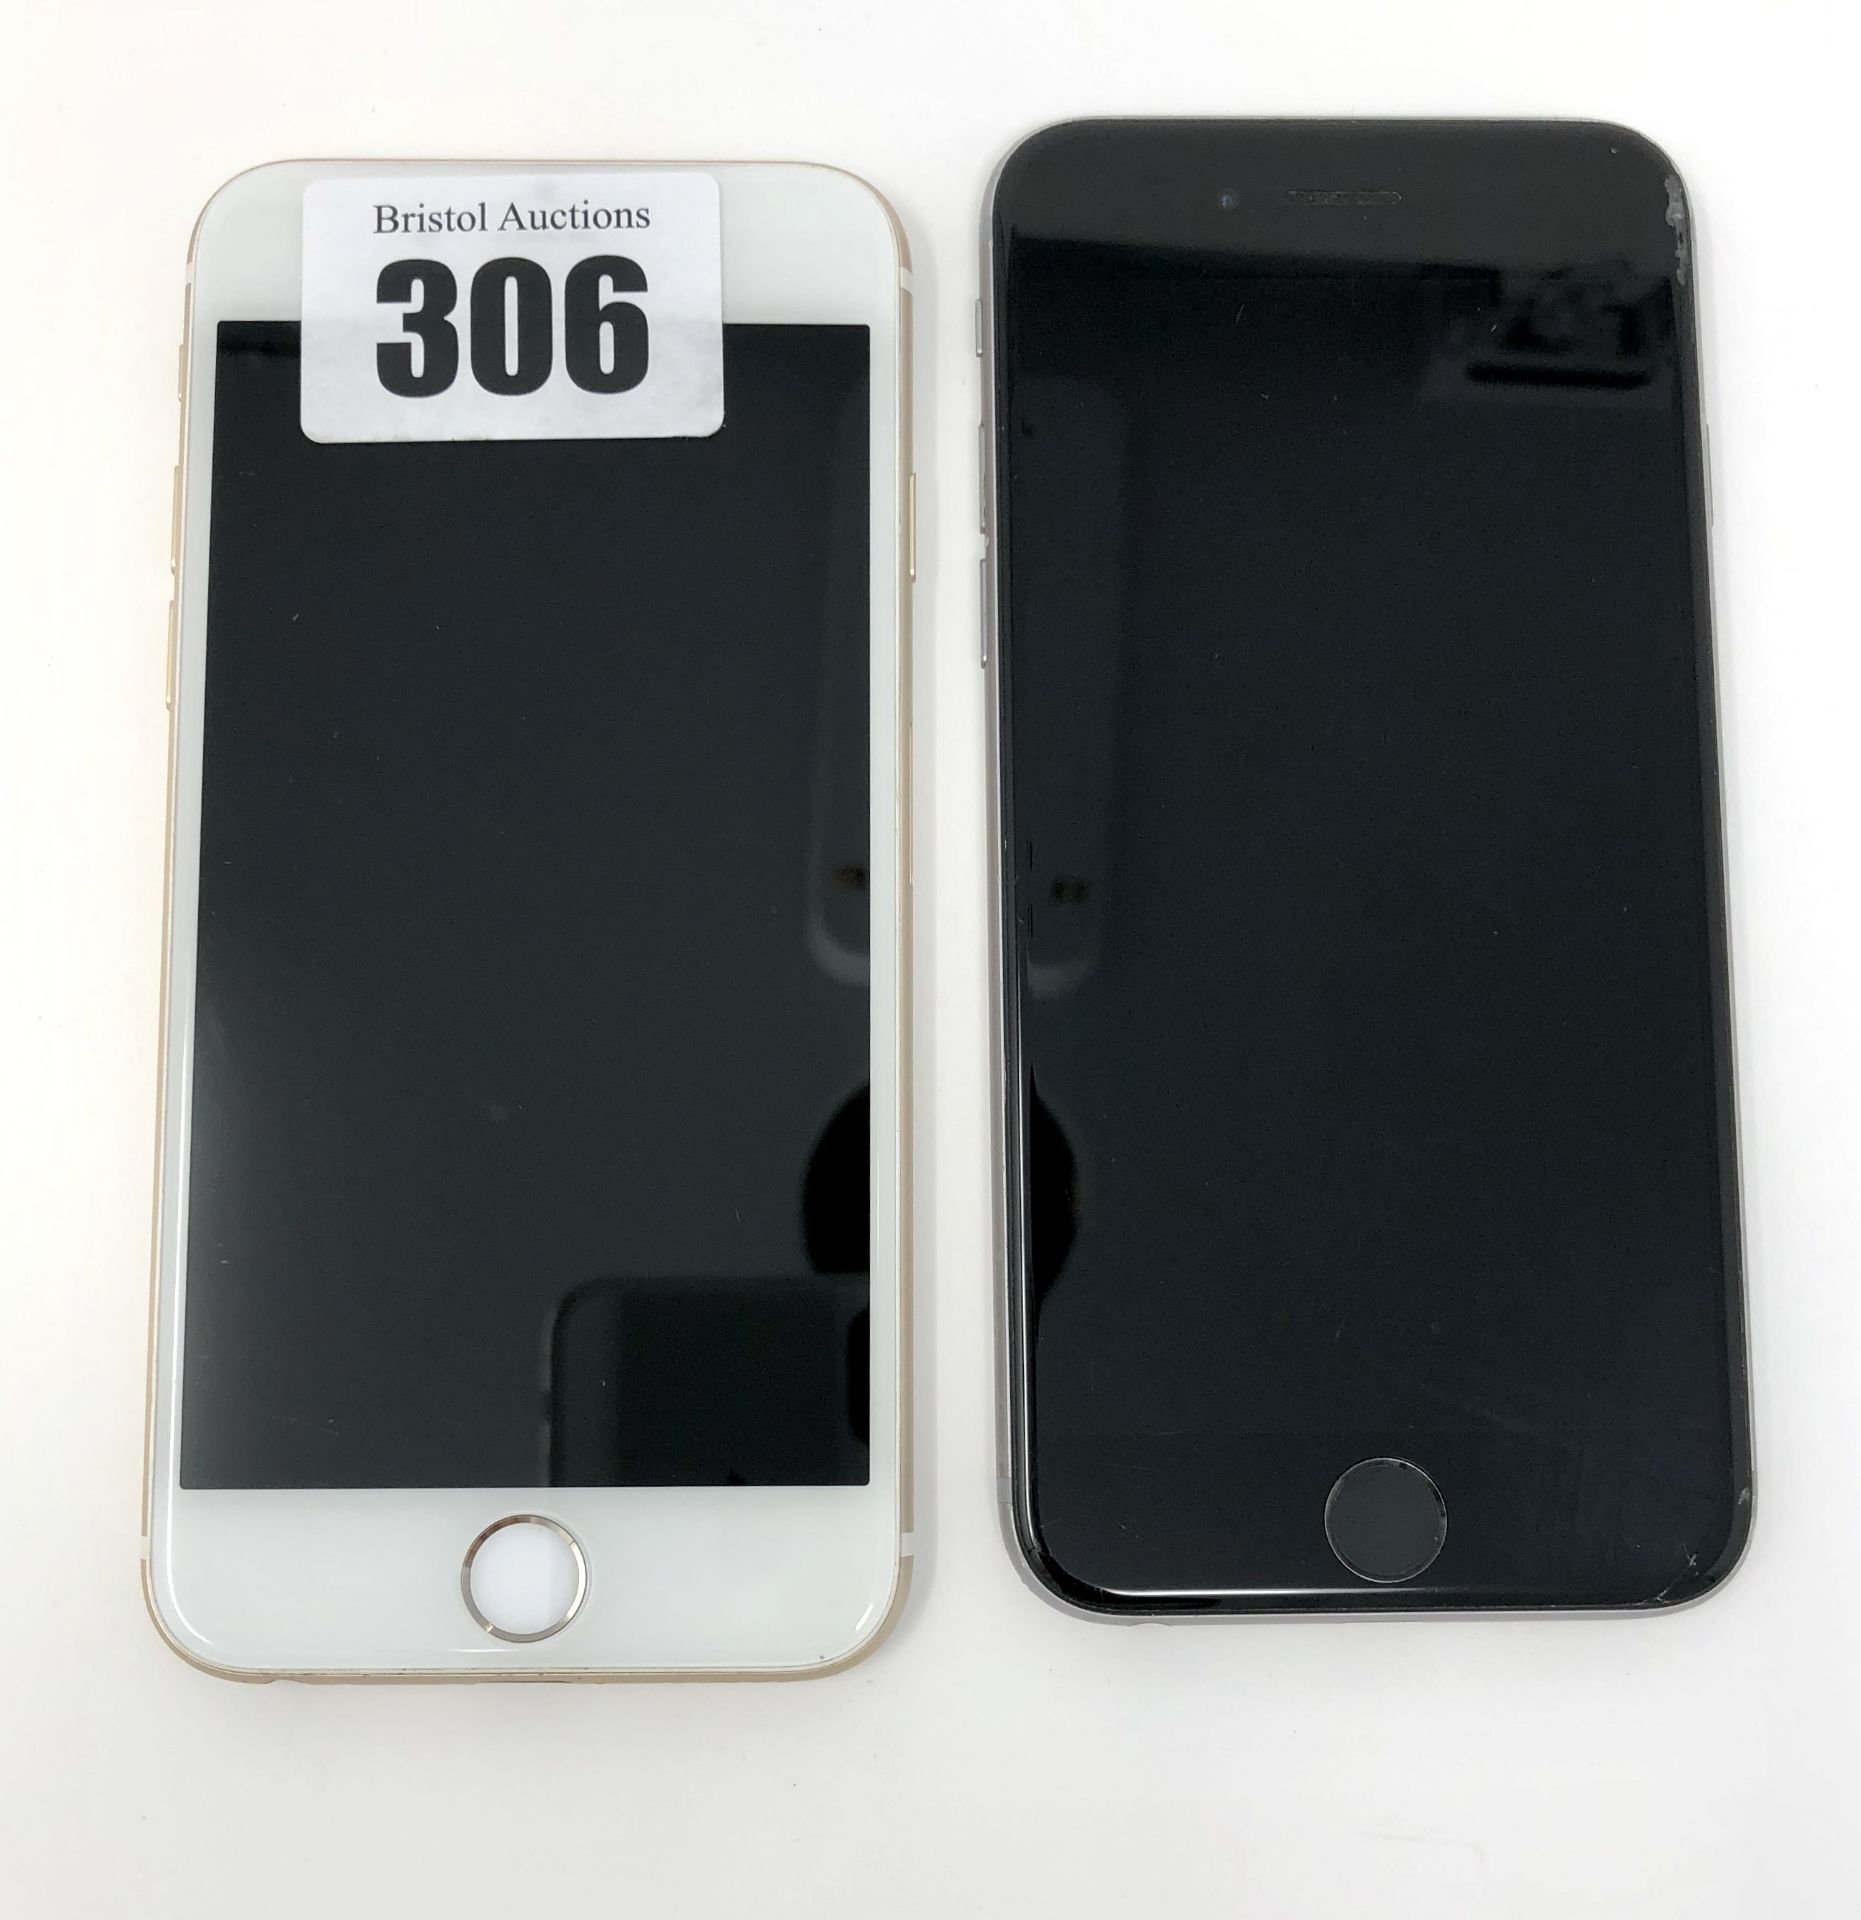 A pre-owned Apple iPhone 6s A1688 16GB in Space Grey (IMEI: 355421074884775) (Damaged screen glass